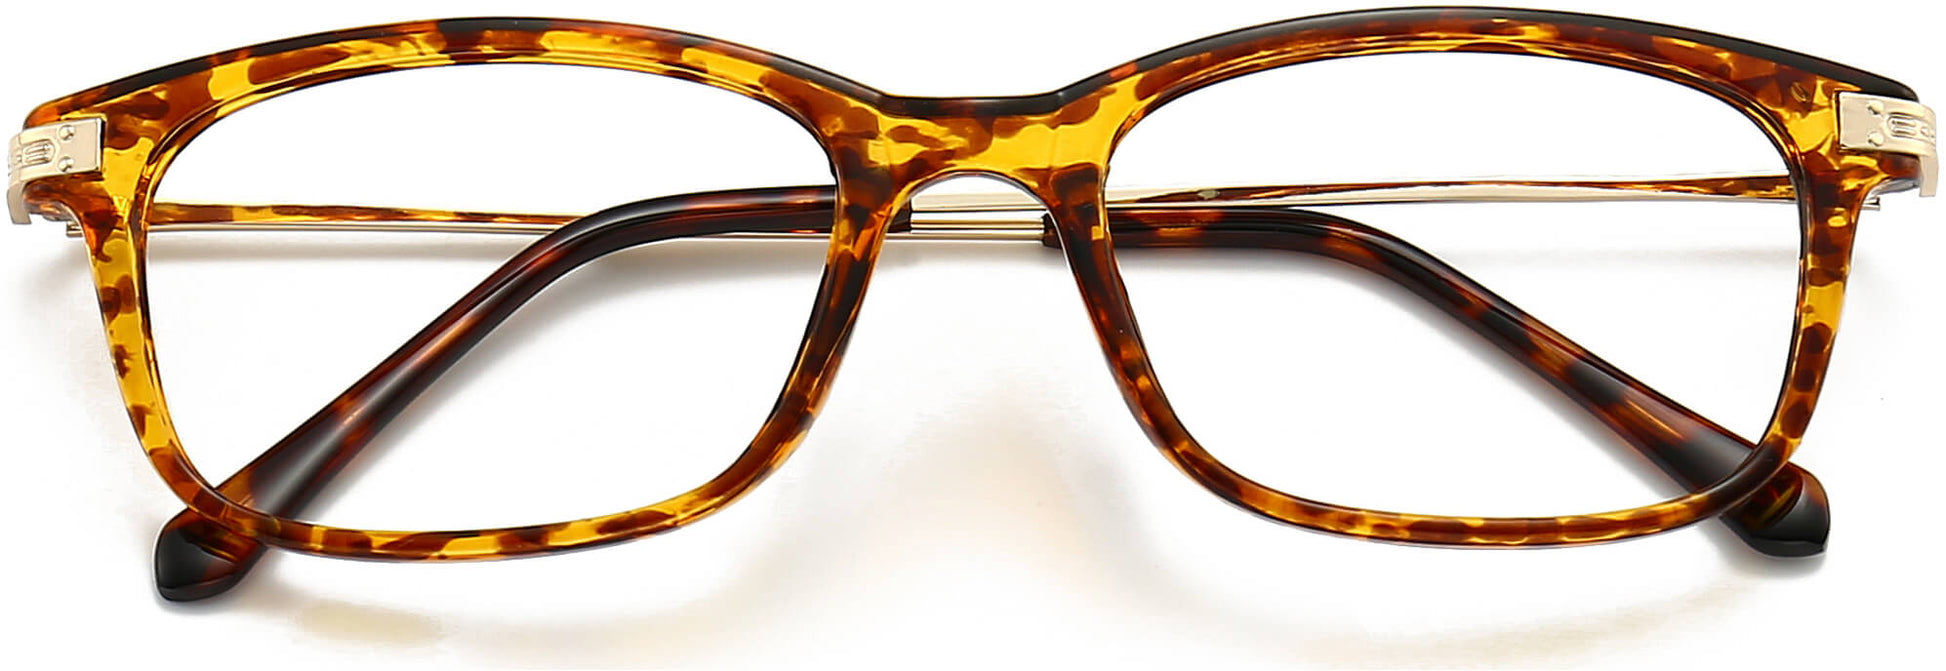 Remington Rectangle Tortoise Eyeglasses from ANRRI, closed view